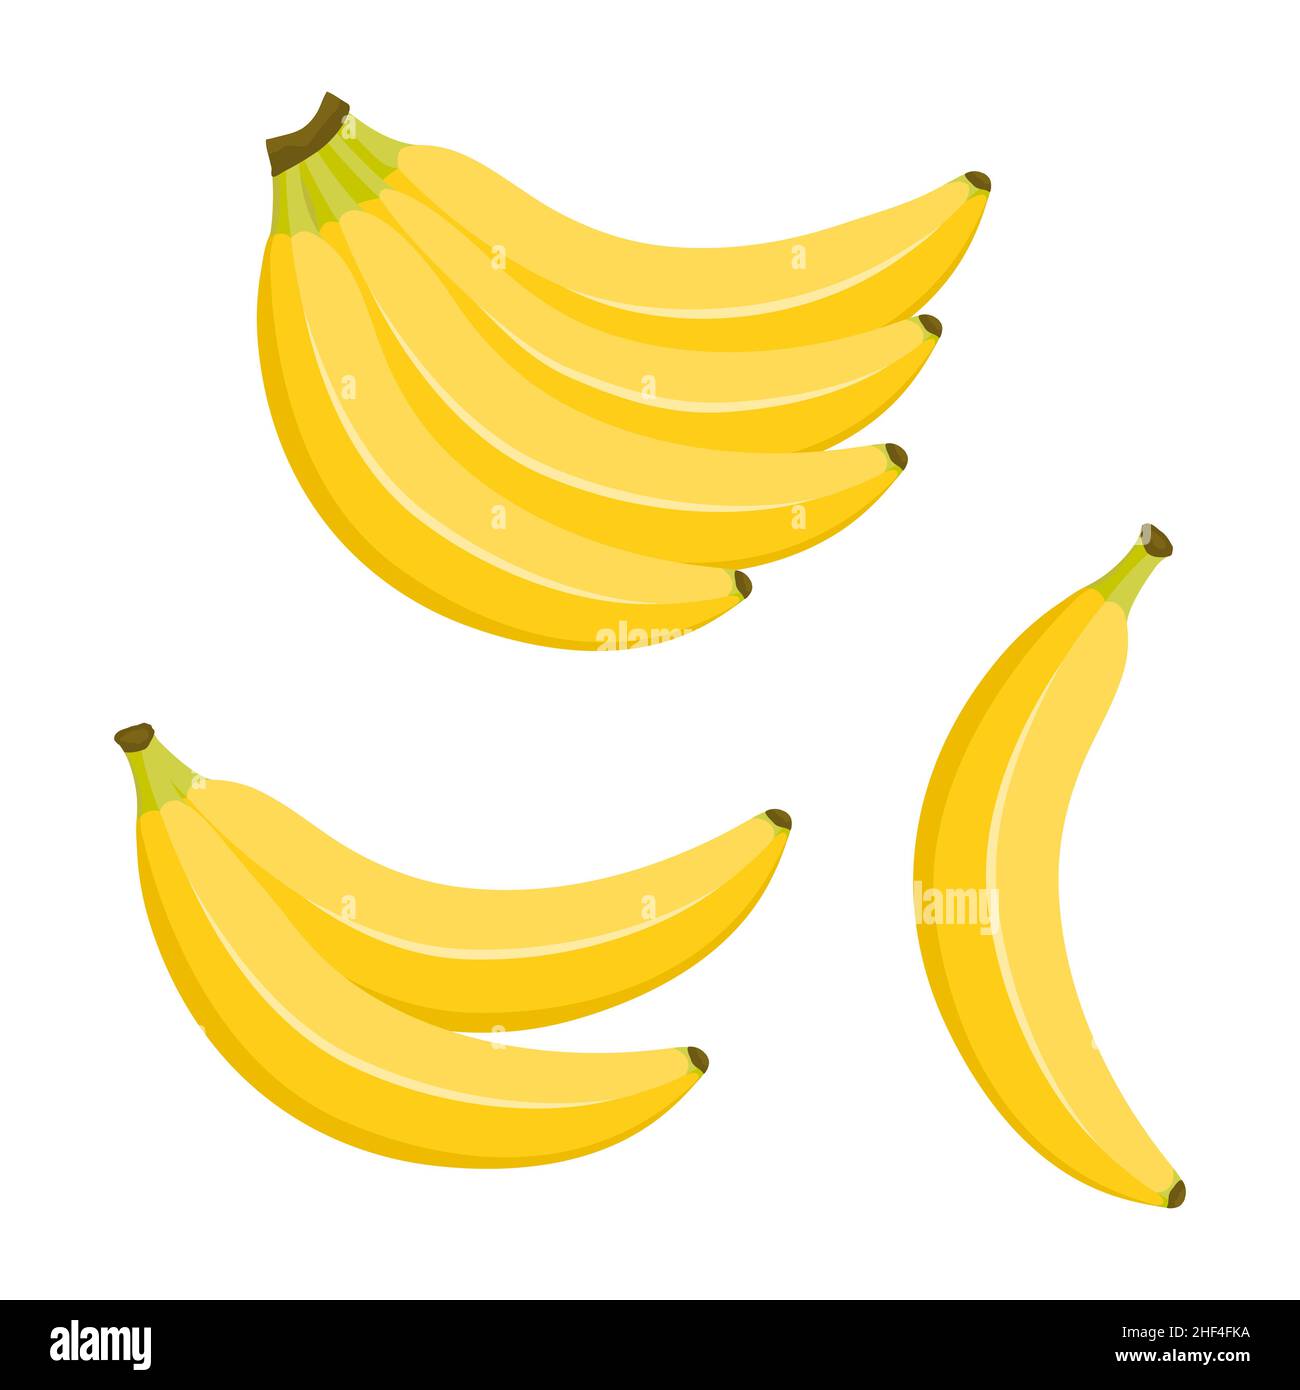 https://c8.alamy.com/comp/2HF4FKA/set-of-fresh-bananas-one-two-and-a-bunch-of-bananas-isolated-vector-illustration-on-white-background-cartoon-flat-style-2HF4FKA.jpg